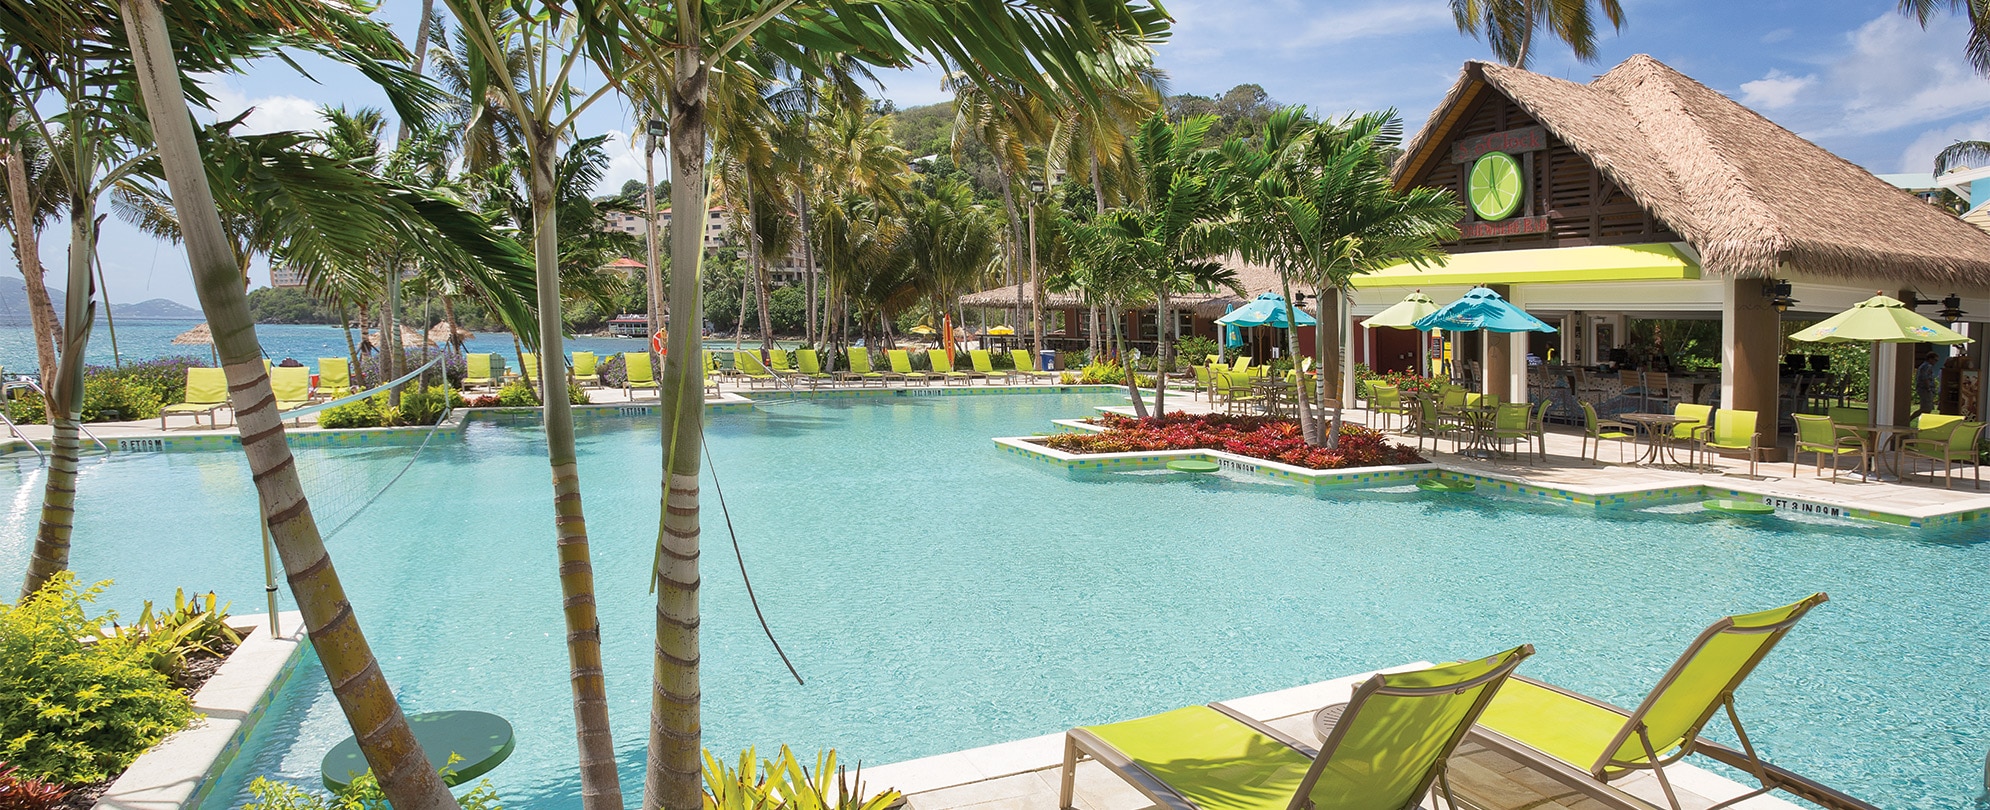 Bright green pool chairs and palms surround the pool and tiki bar of Margaritaville Vacation Club by Wyndham - St. Thomas.